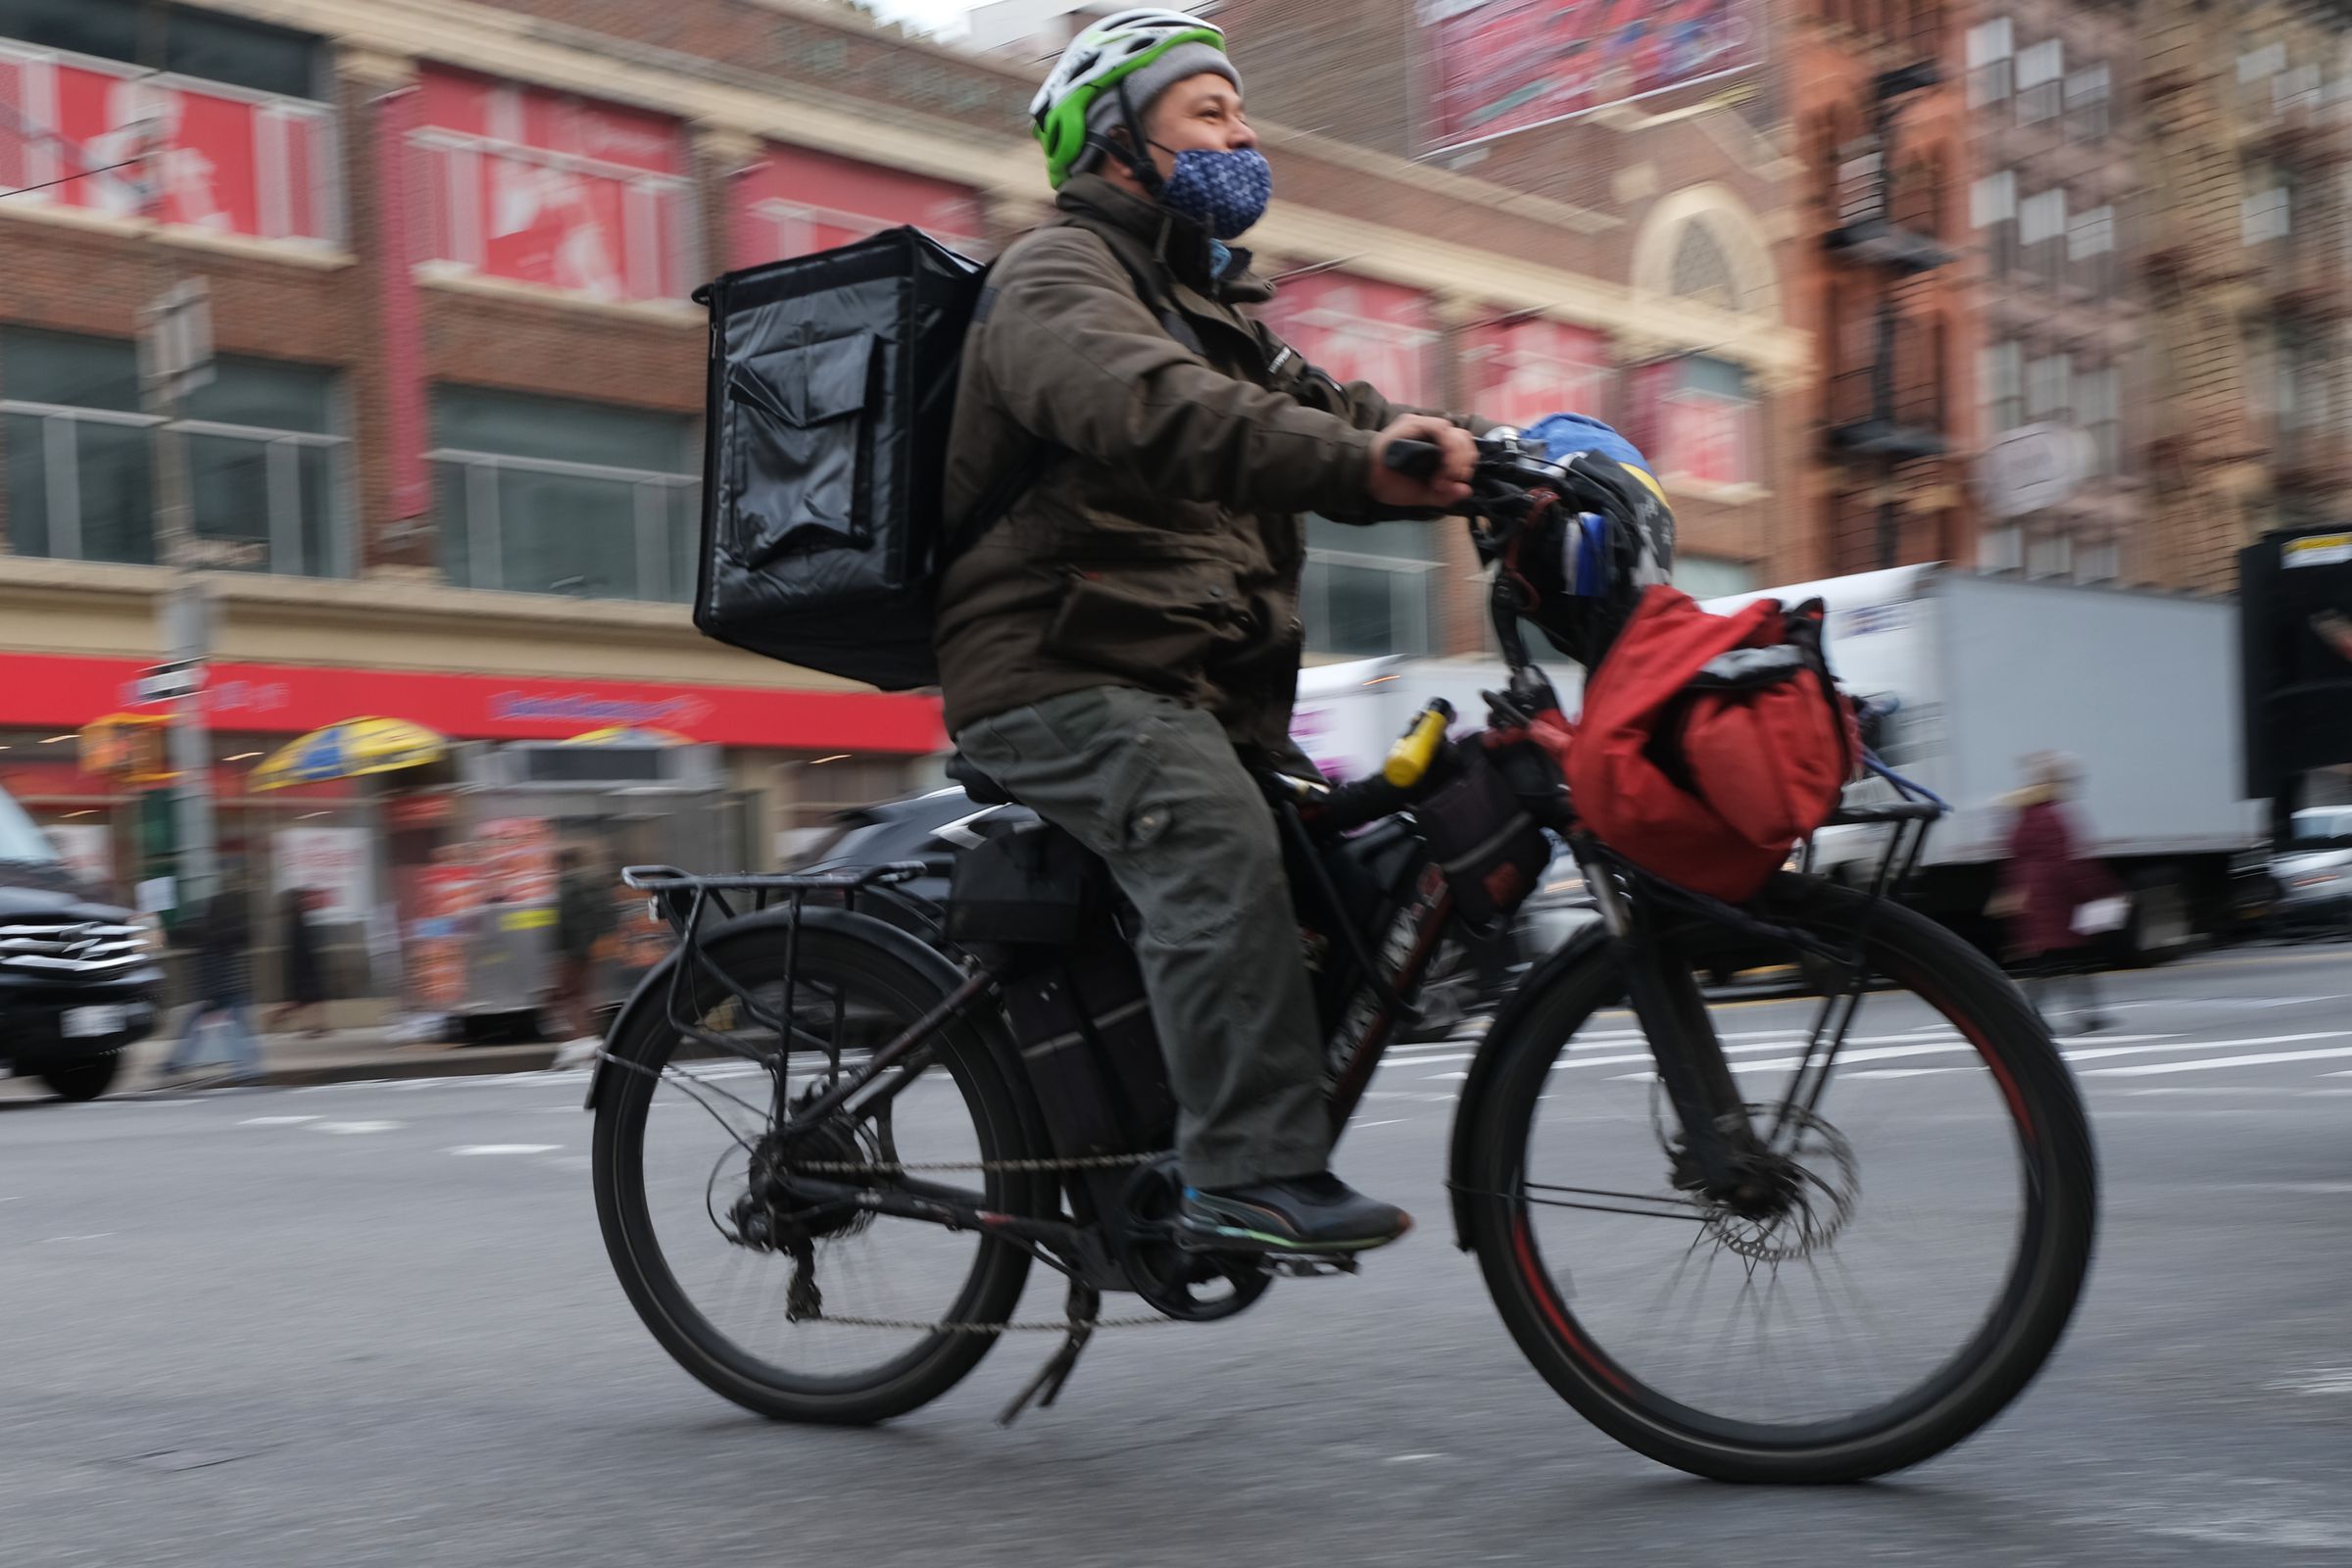 A delivery worker with a package on their back rides an e-bike in Manhattan in New York City.